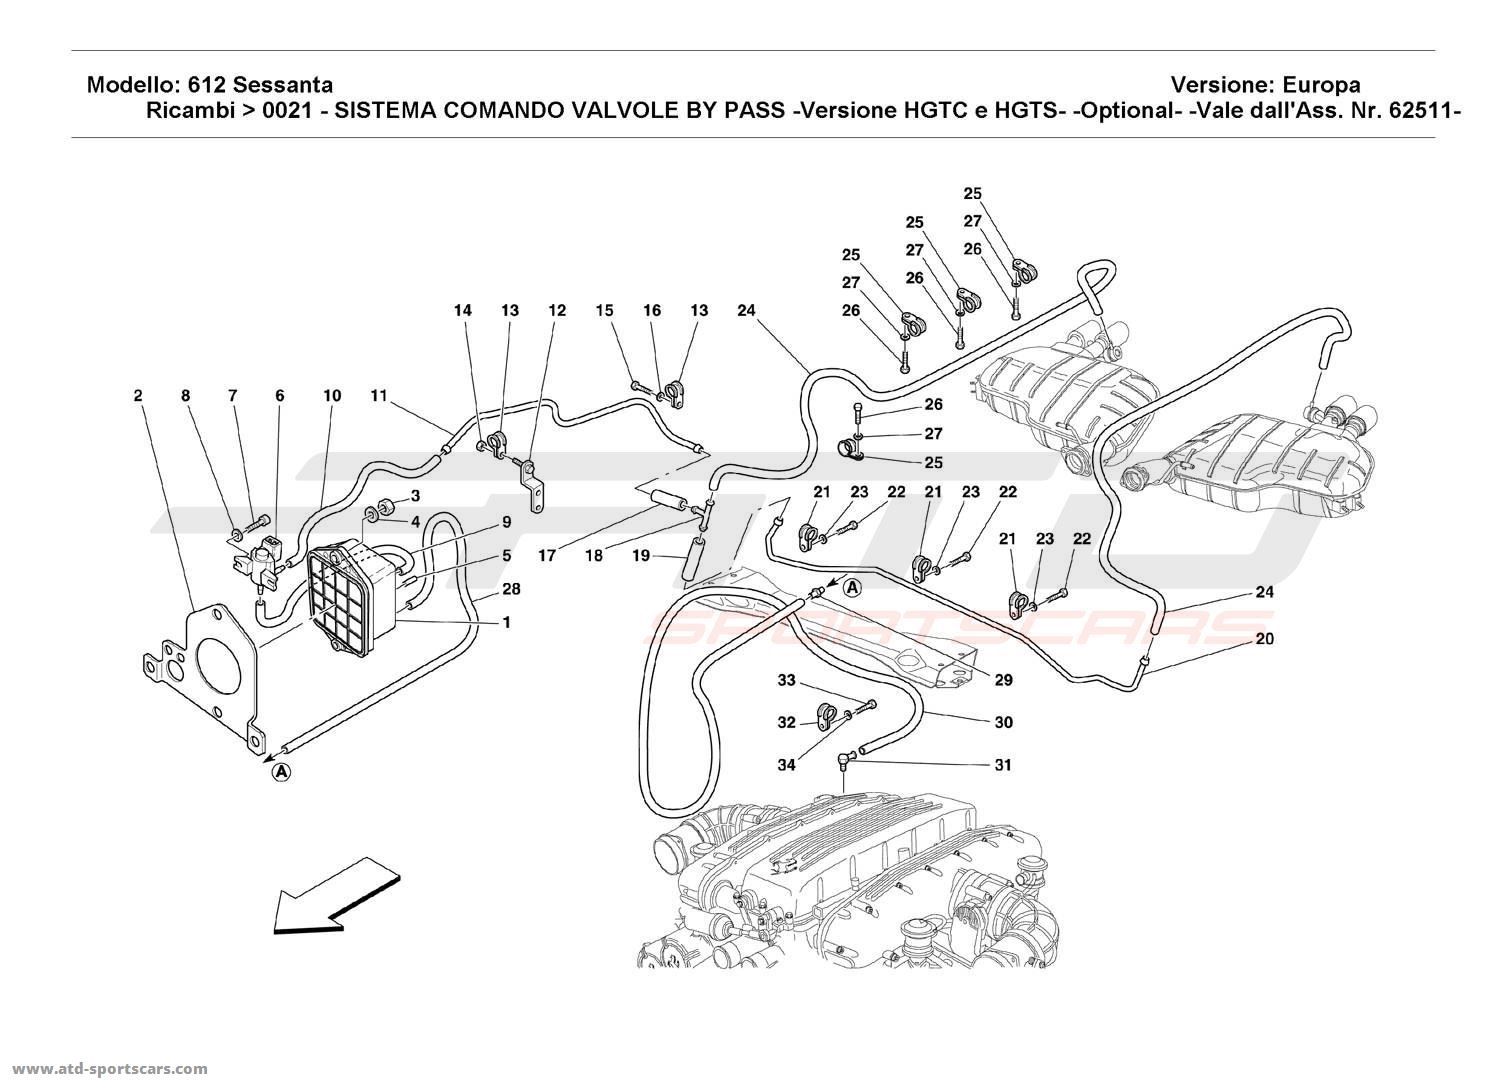 Ferrari 612 Sessanta BY PASS VALVES CONTROL SYSTEM -HGTC and HGTS version-